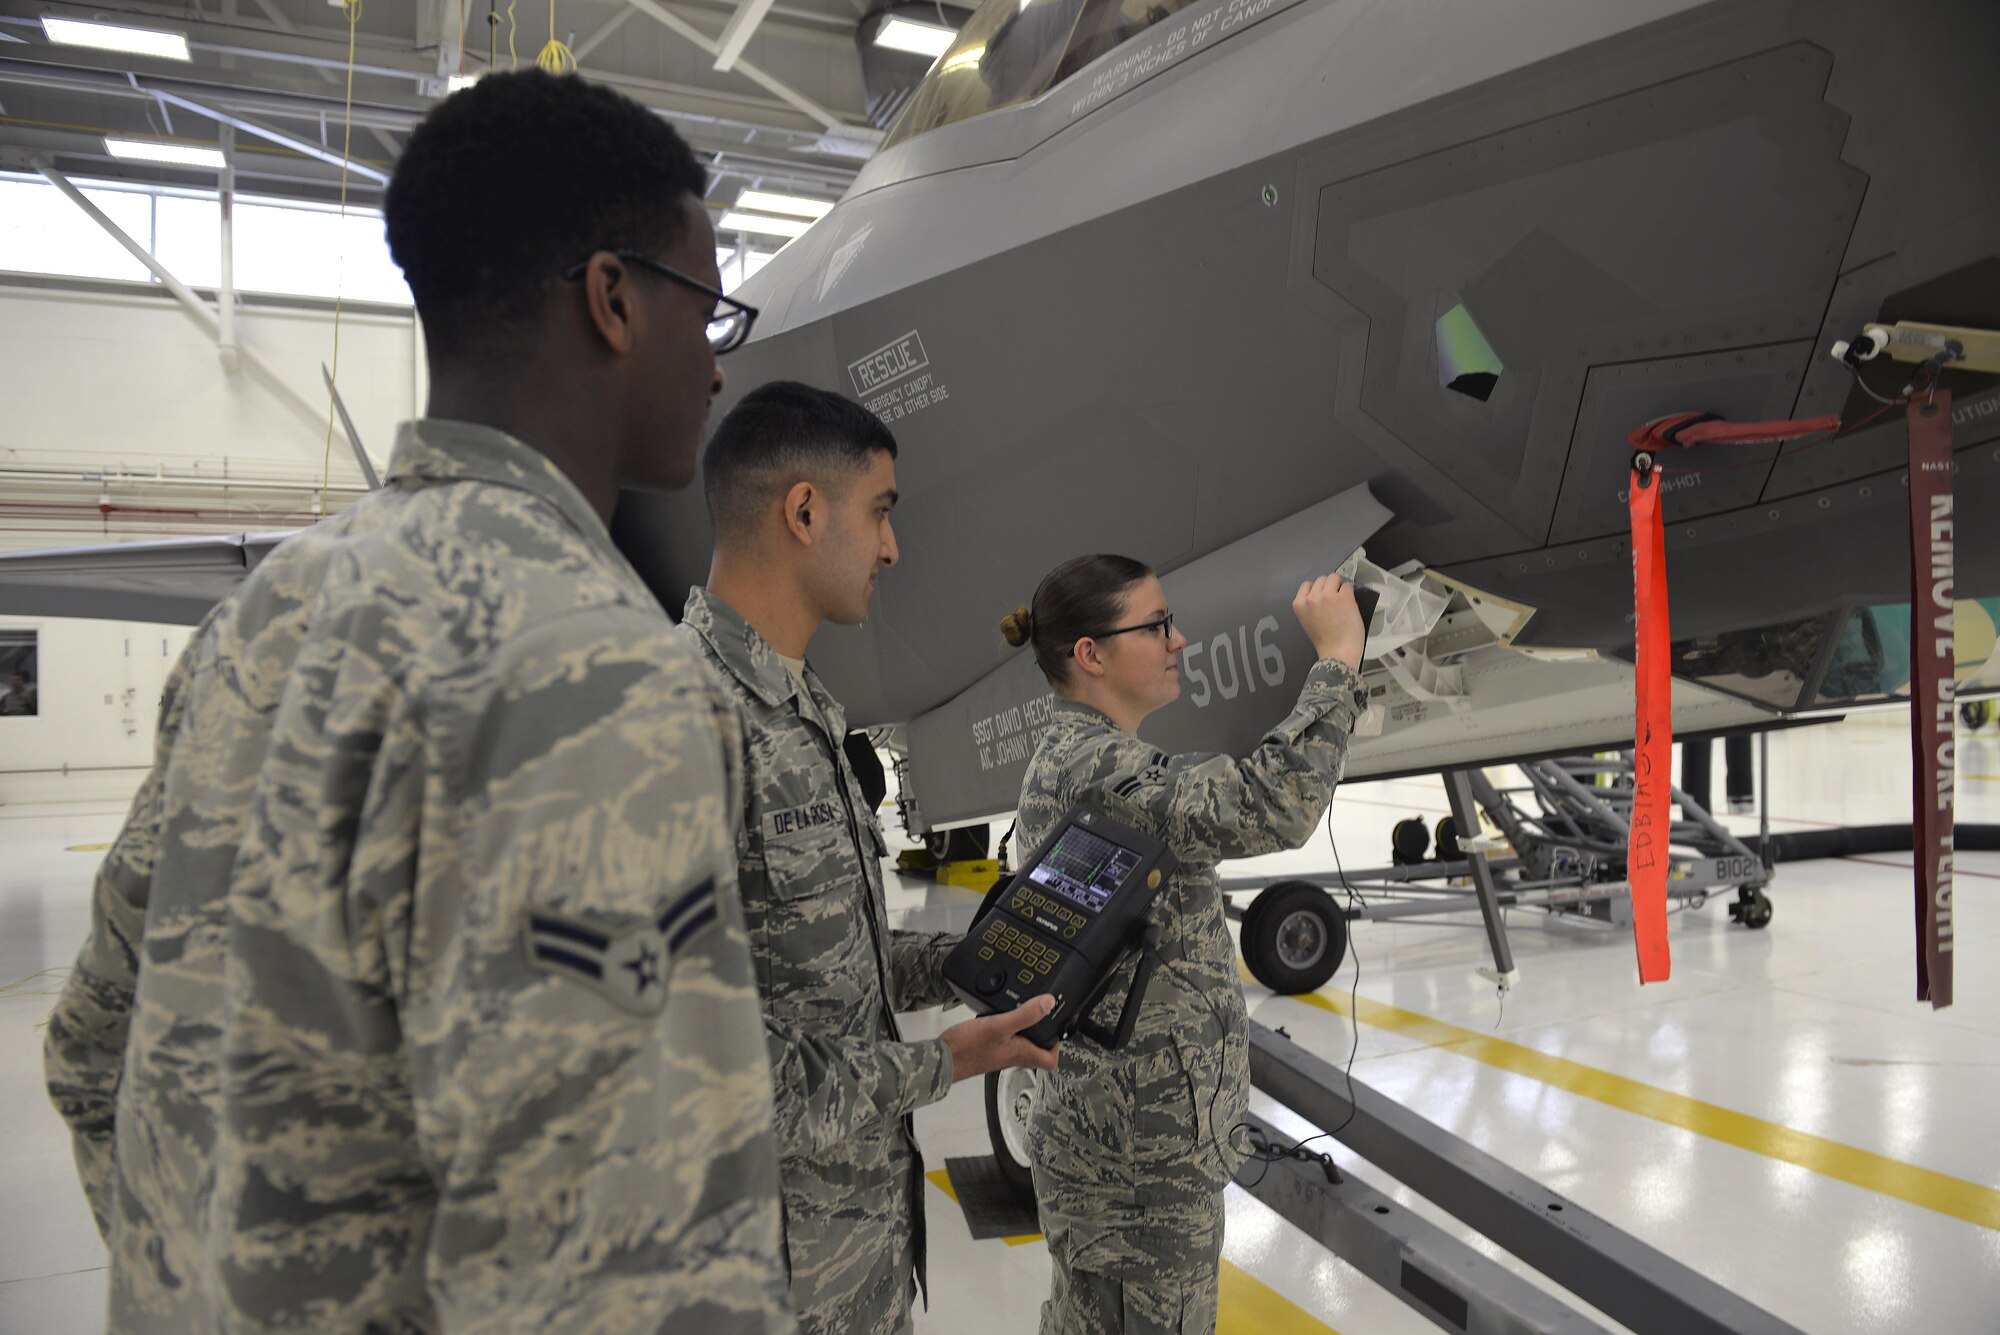 Nondestructive inspection Airmen use a transducer to check for imperfections on an F-35A Lightning II panel at Eglin Air Force base Fla., May 16, 2016. This piece of equipment uses sound vibrations to check for cracks in the inner layers of metal on a jet that may go unnoticed by the naked eye. If there is underlying damage, the Sonic 1200 unit will reflect the depth of damage in need of repair. (U.S. Air Force photo/Senior Airman Andrea Posey)